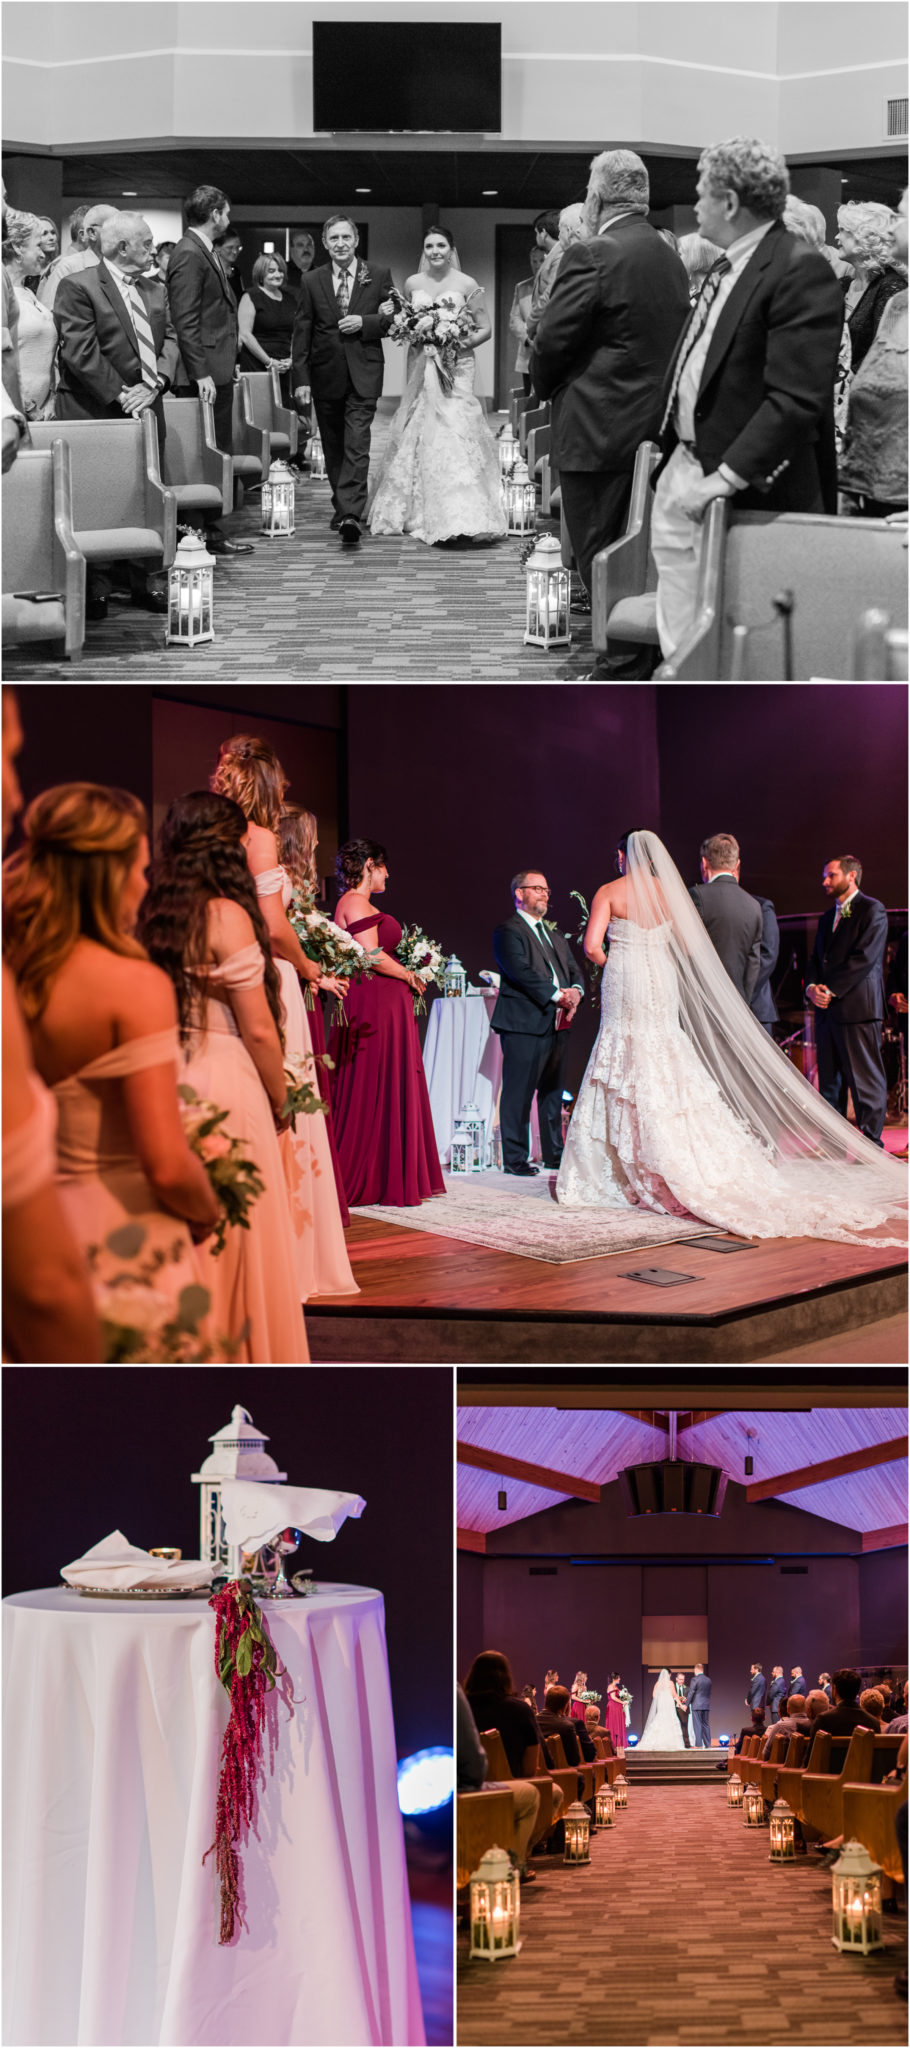 A Vineyard Wedding at Cityscape Winery in Pelter, SC Ceremony